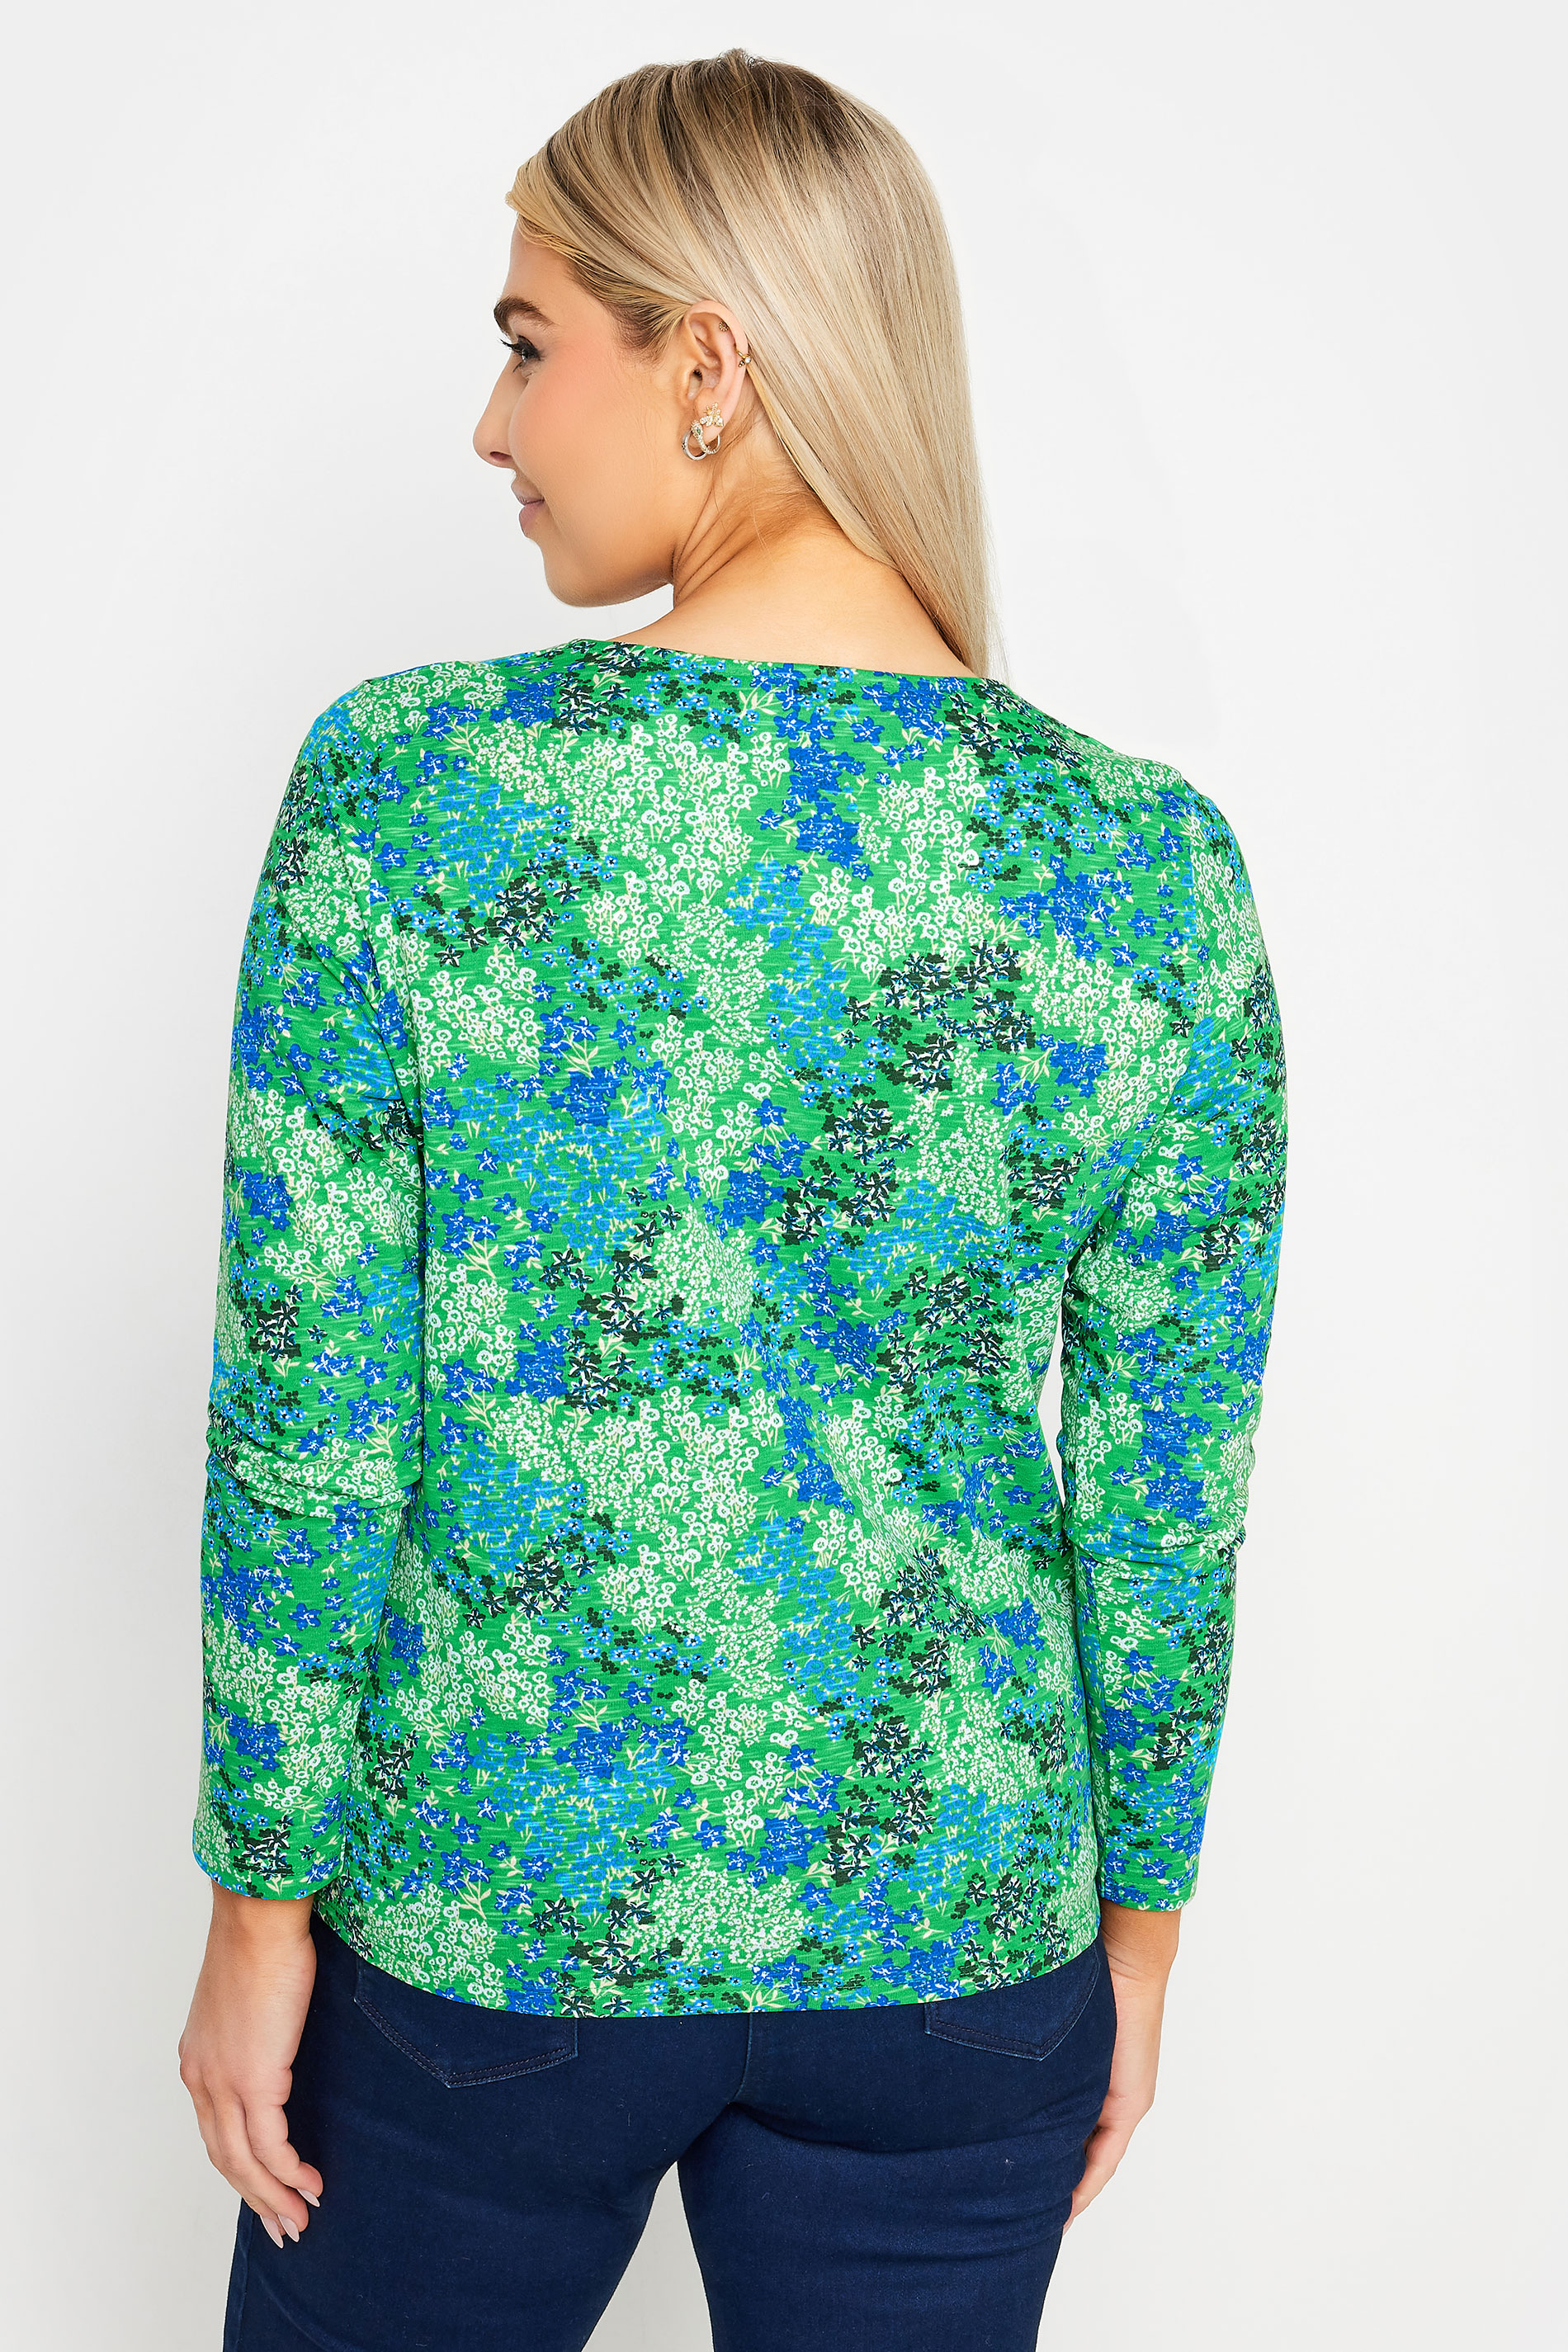 M&Co Green Ditsy Floral Notch Neck Long Sleeve Top | M&Co 3